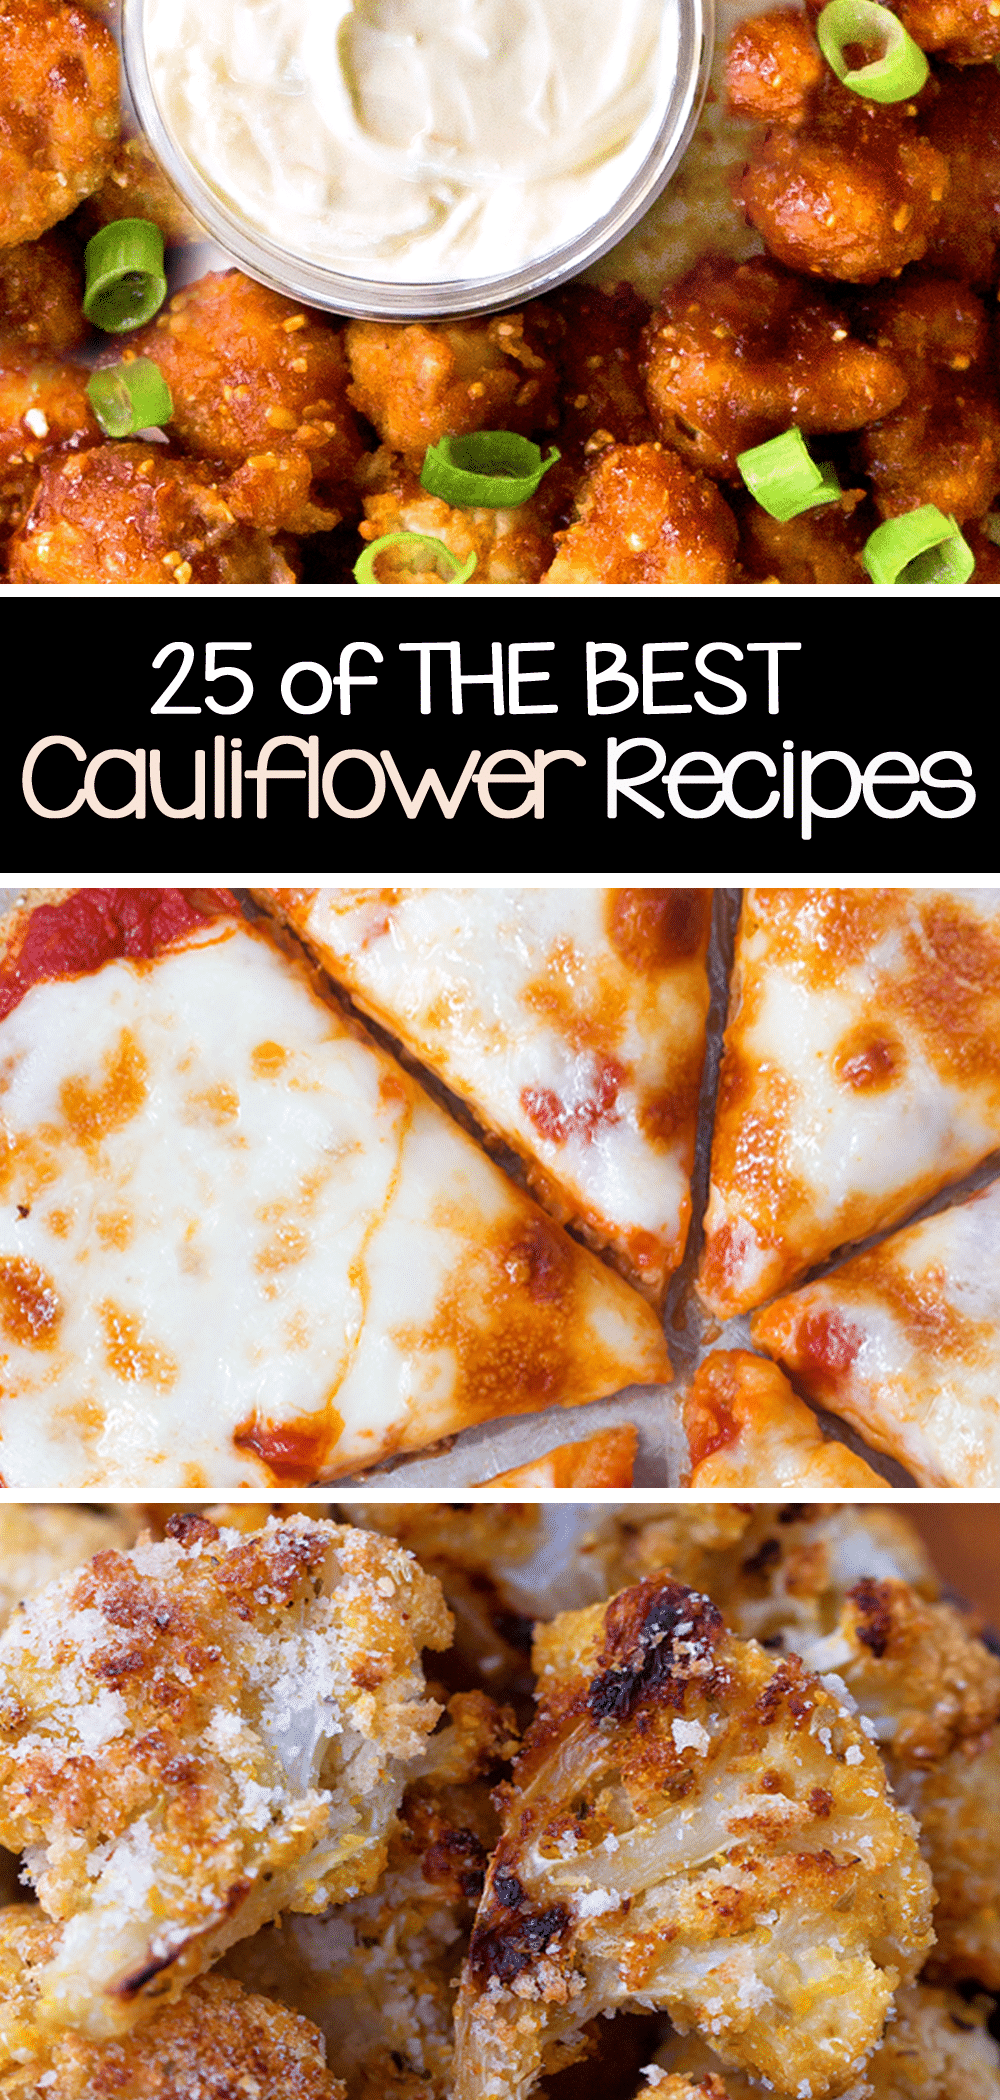 The 25 Best Cauliflower Recipes roasted fried or baked